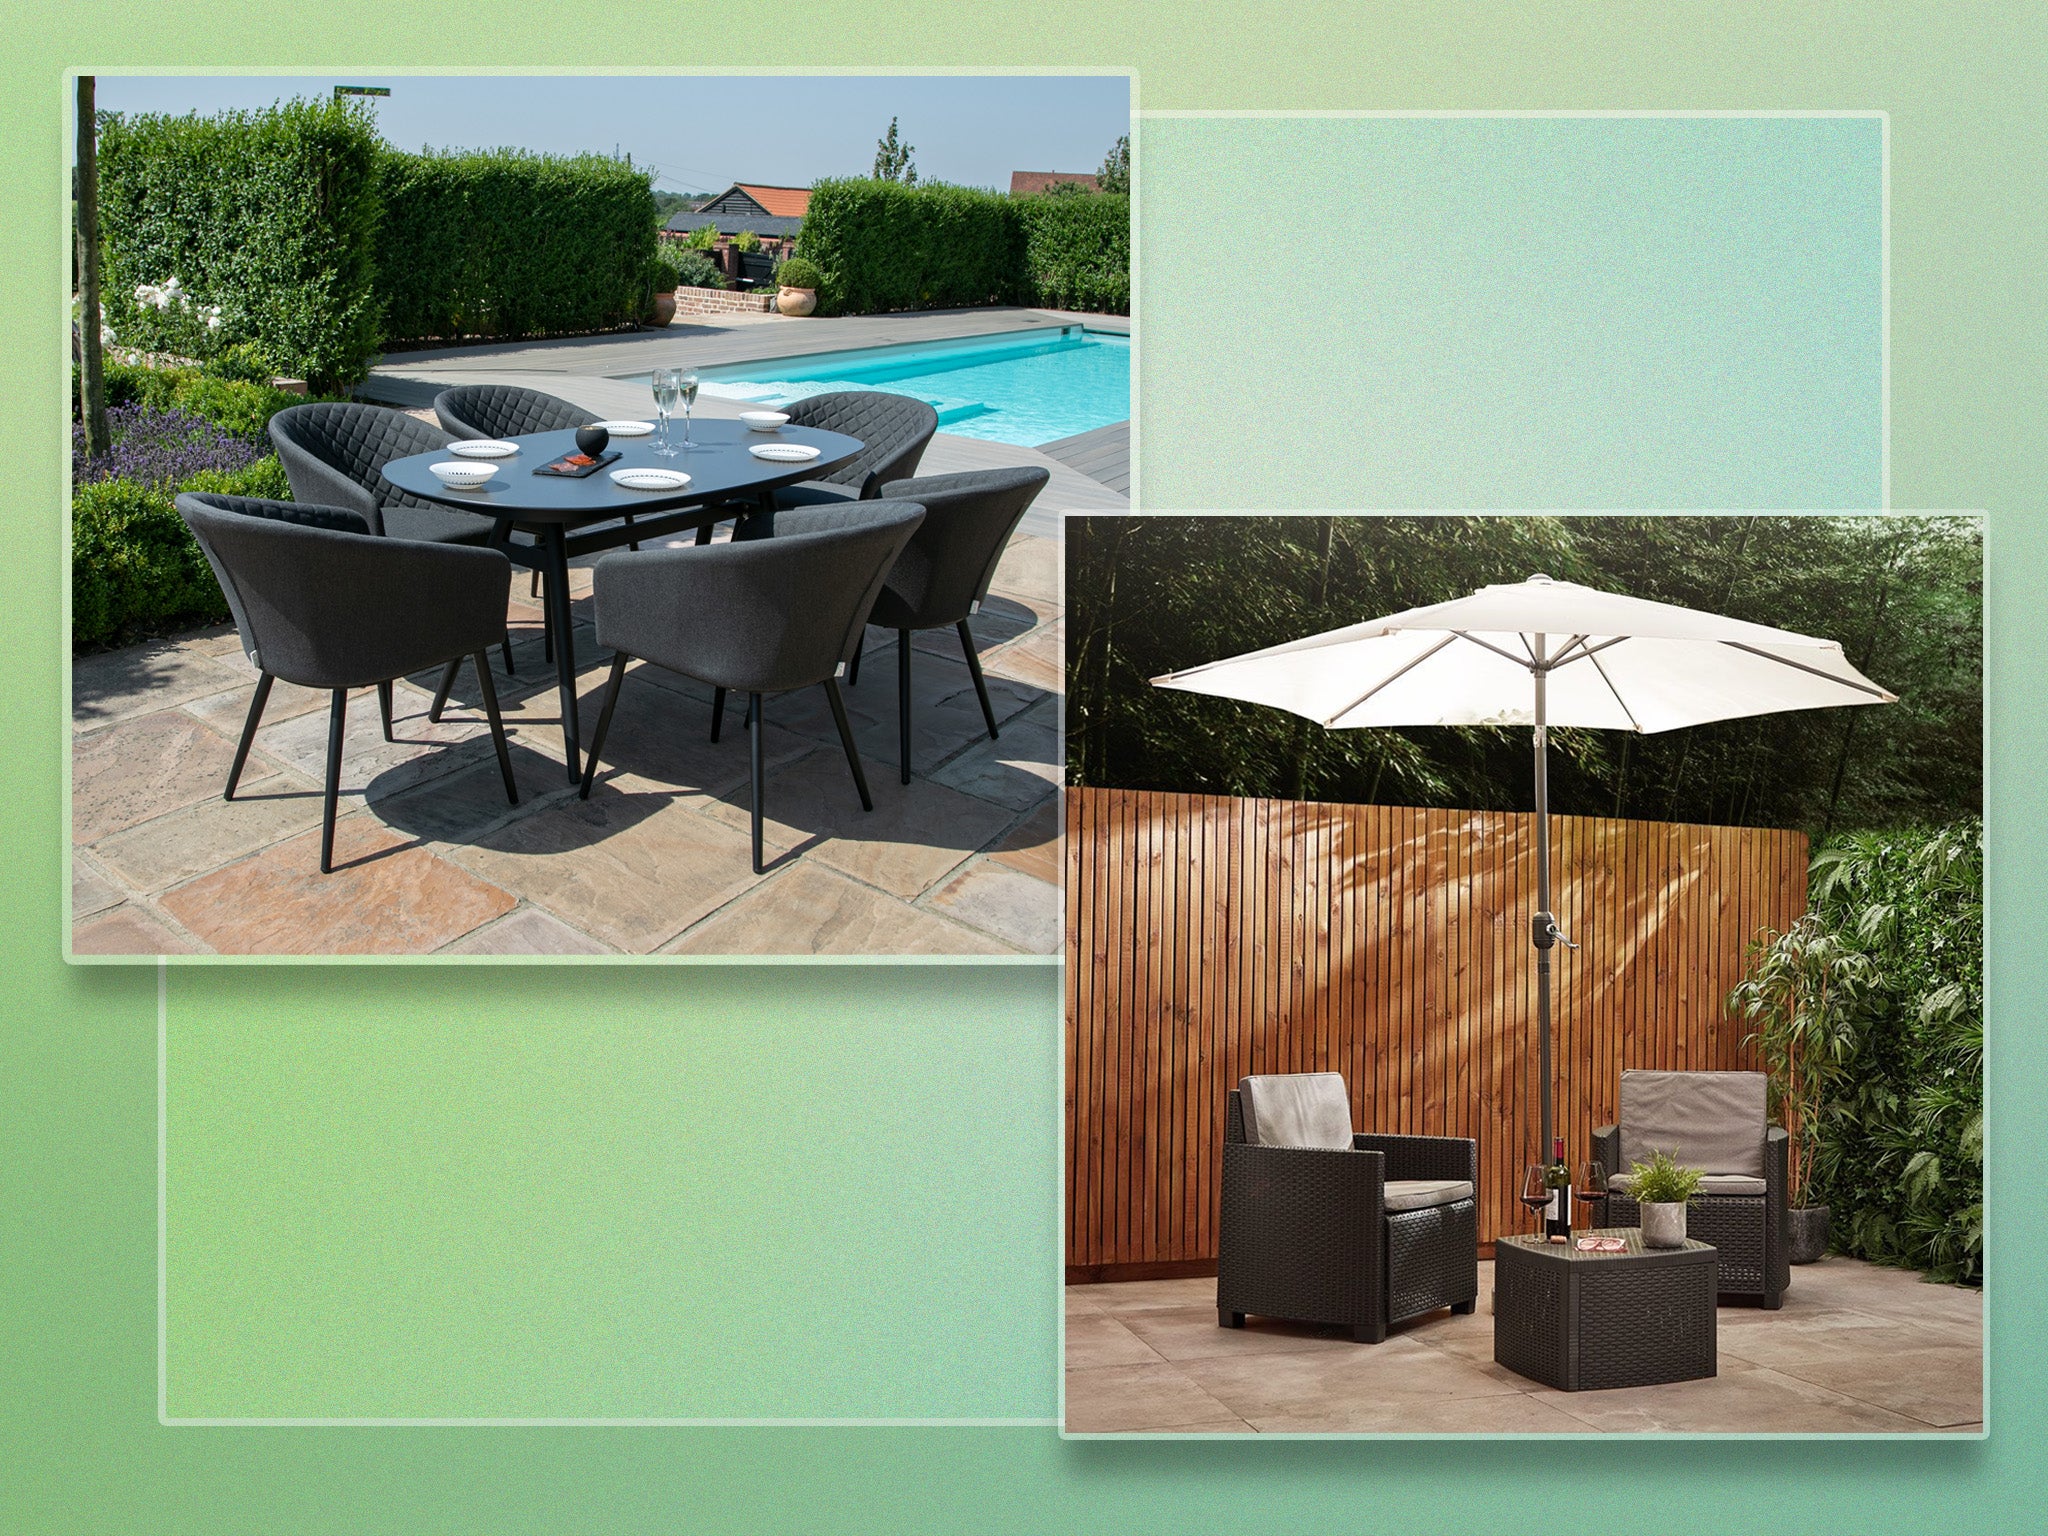 Set the scene for summer and beyond with our top picks for every budget and outdoor space